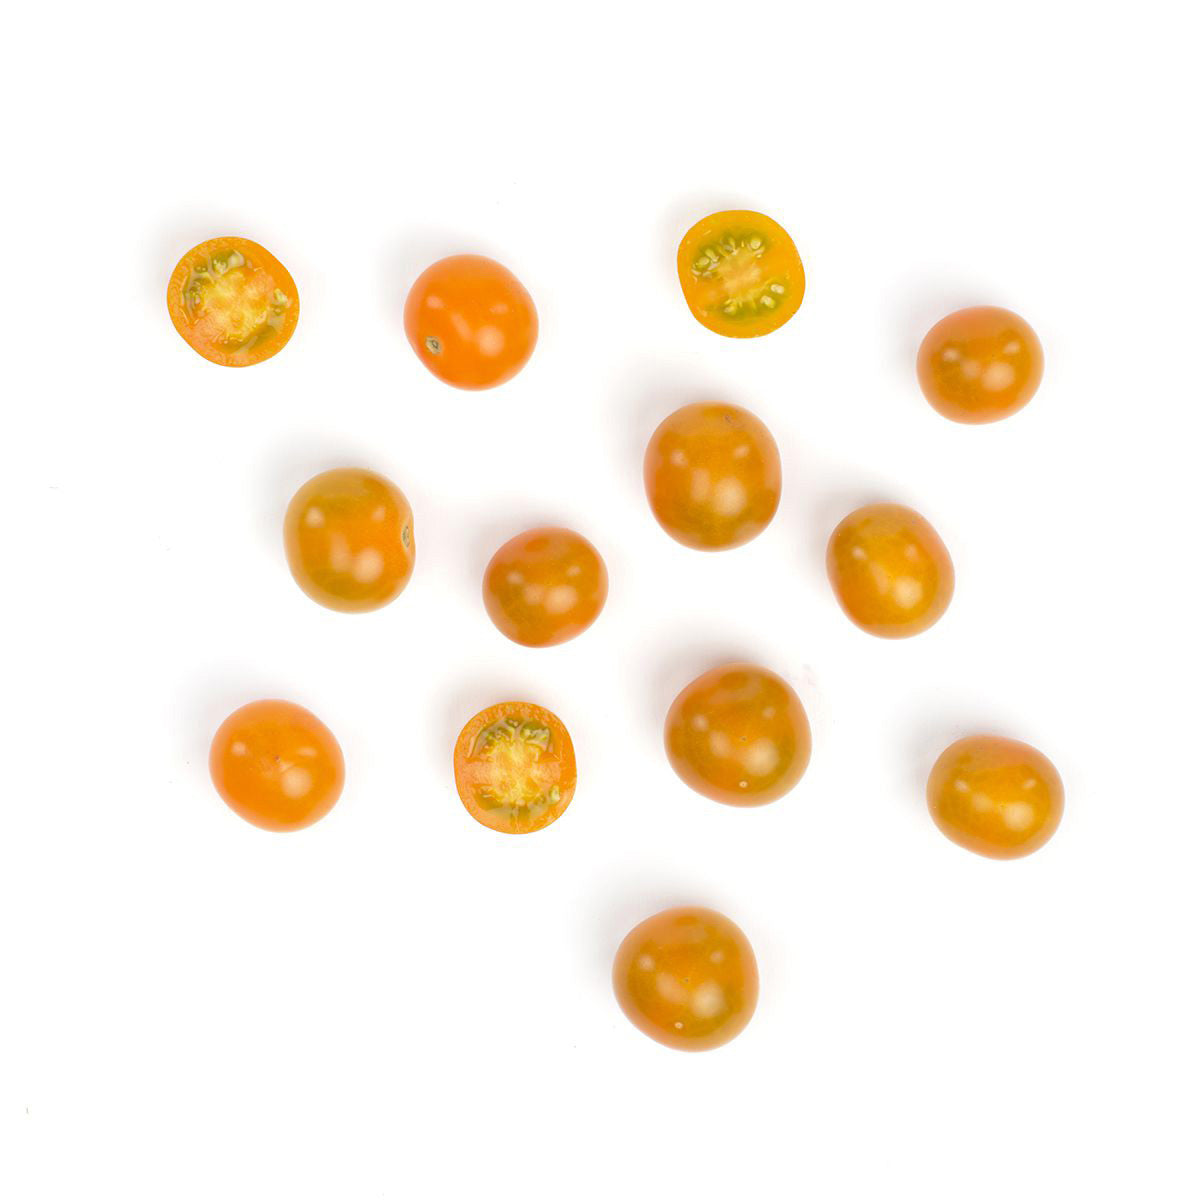 Lady Moon Farms Organic Sungold Cherry Tomatoes 1 PT